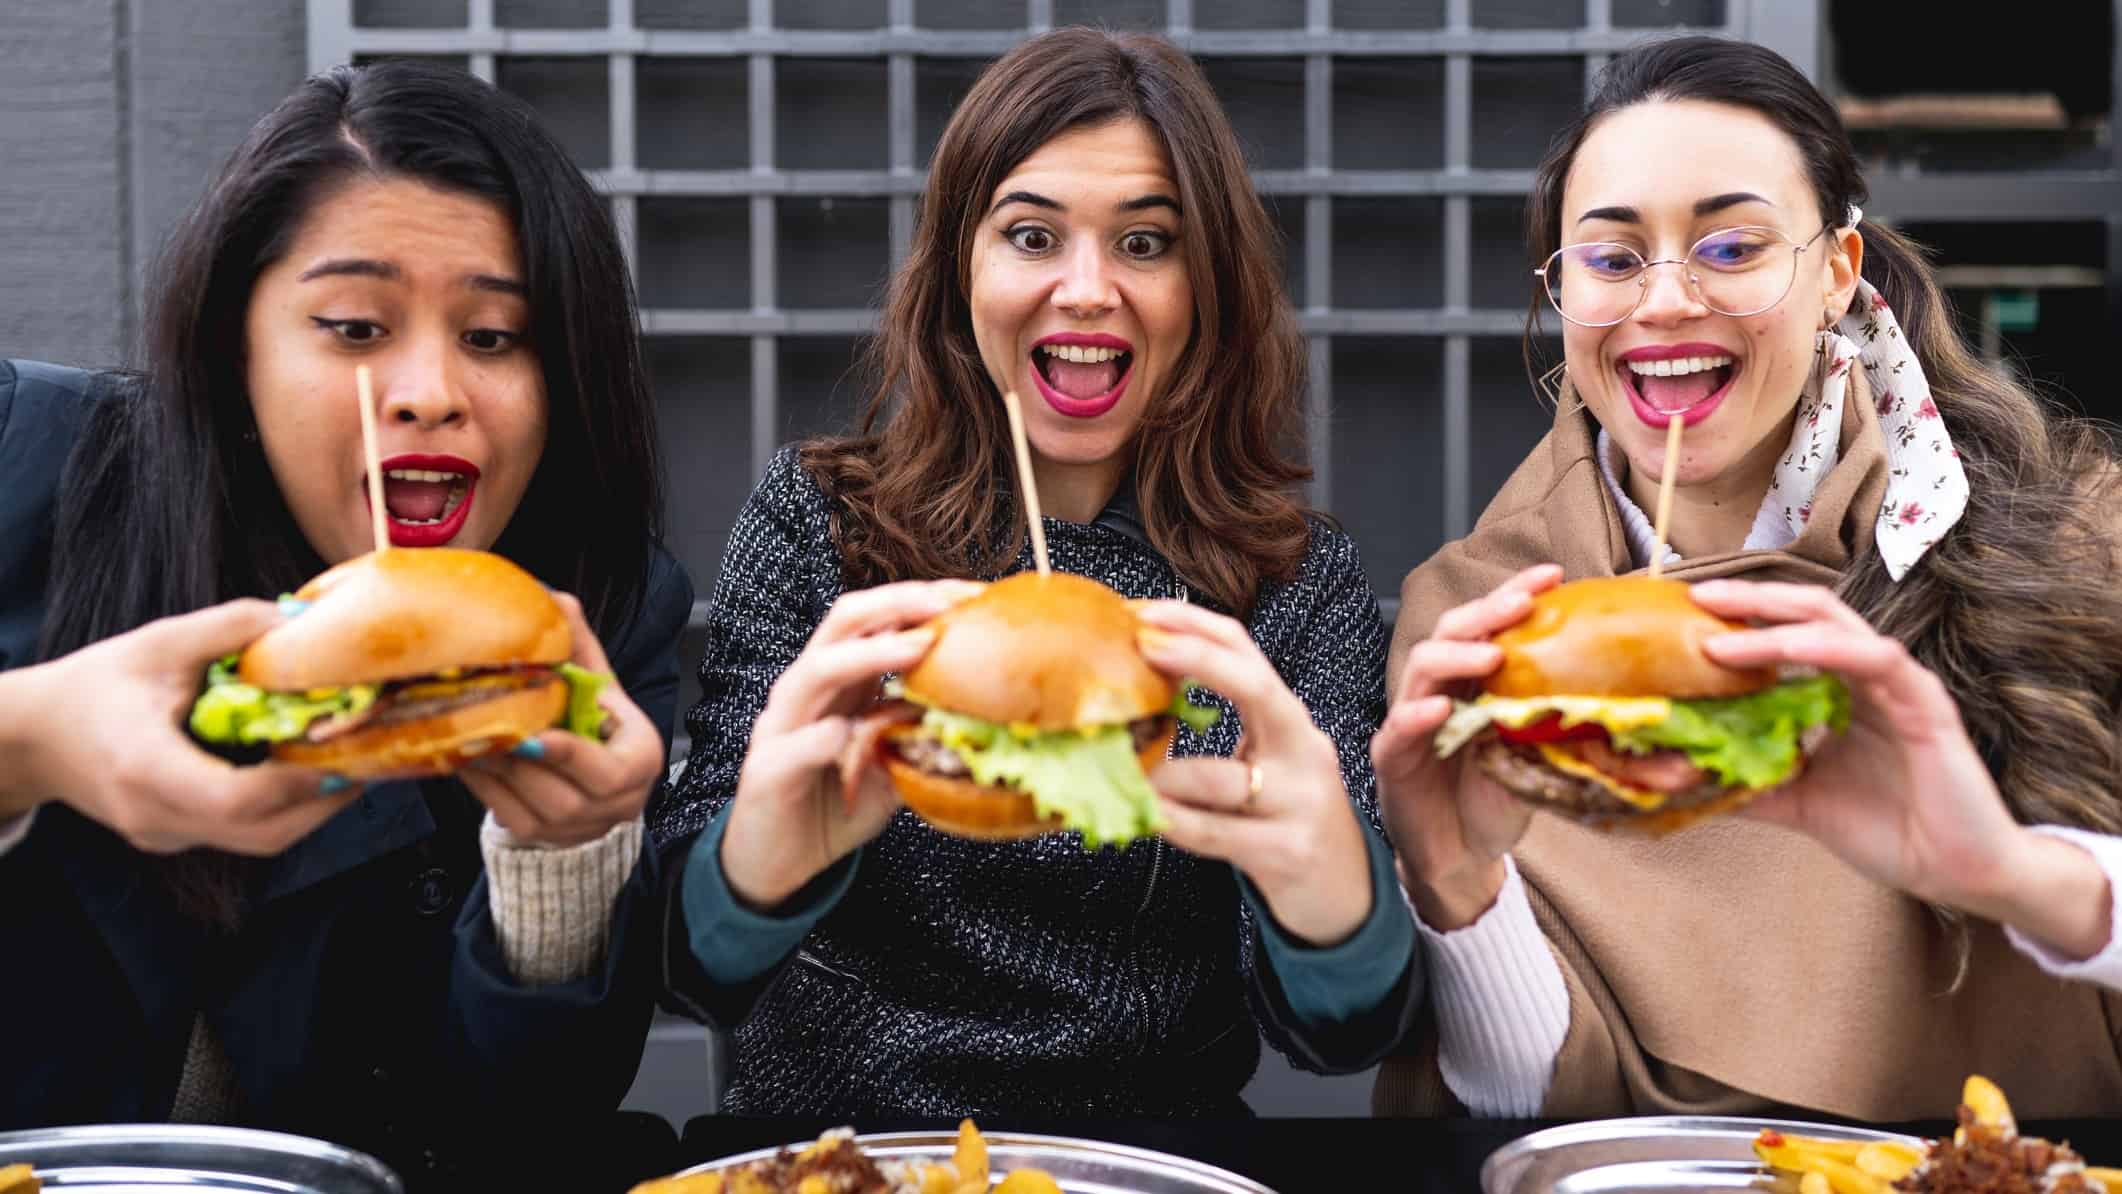 Three young women sit side by side each holding large hamburgers with the lot skewered with bamboo sticks in their two hands with wide, happy smiles on their faces as they look at their hamburgers just before they are about to tuck into them.